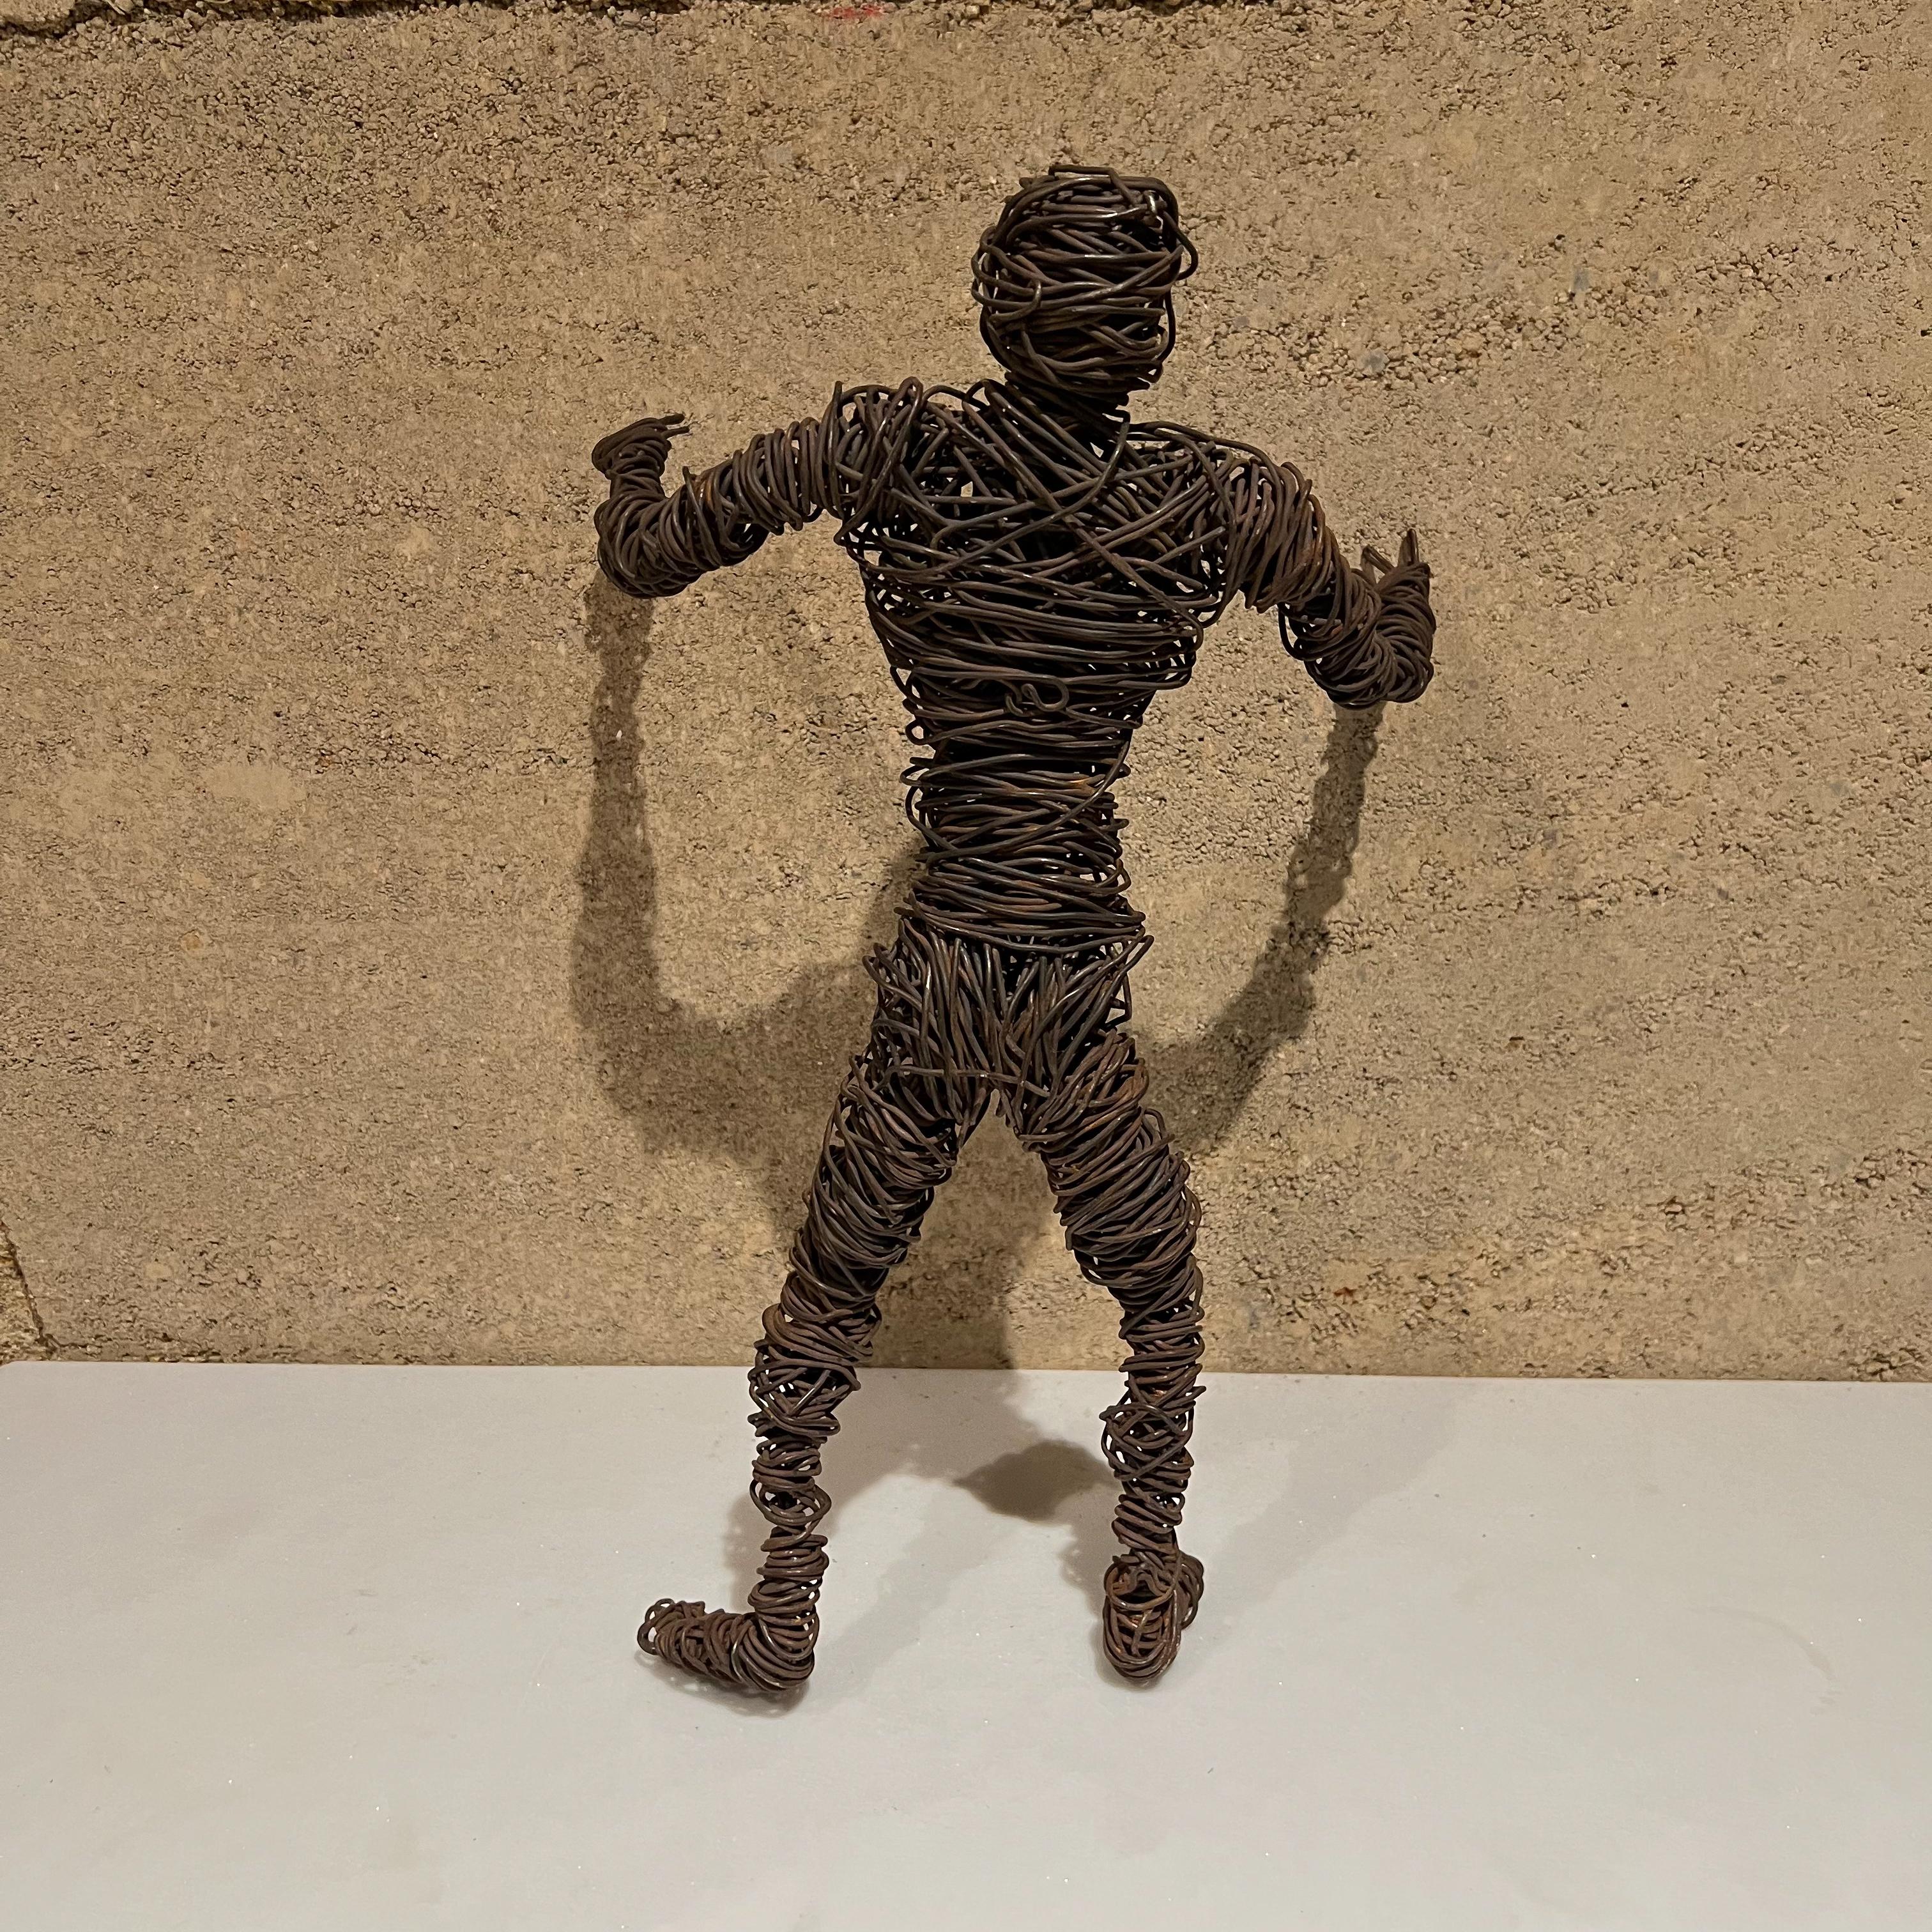 1970s Modern wire man metal sculpture midcentury Brutalist Art
Spun metal wire
Measures: 16.5 tall x 10.5 width x 7.25 depth
Preowned original unrestored condition.
See images please.
  